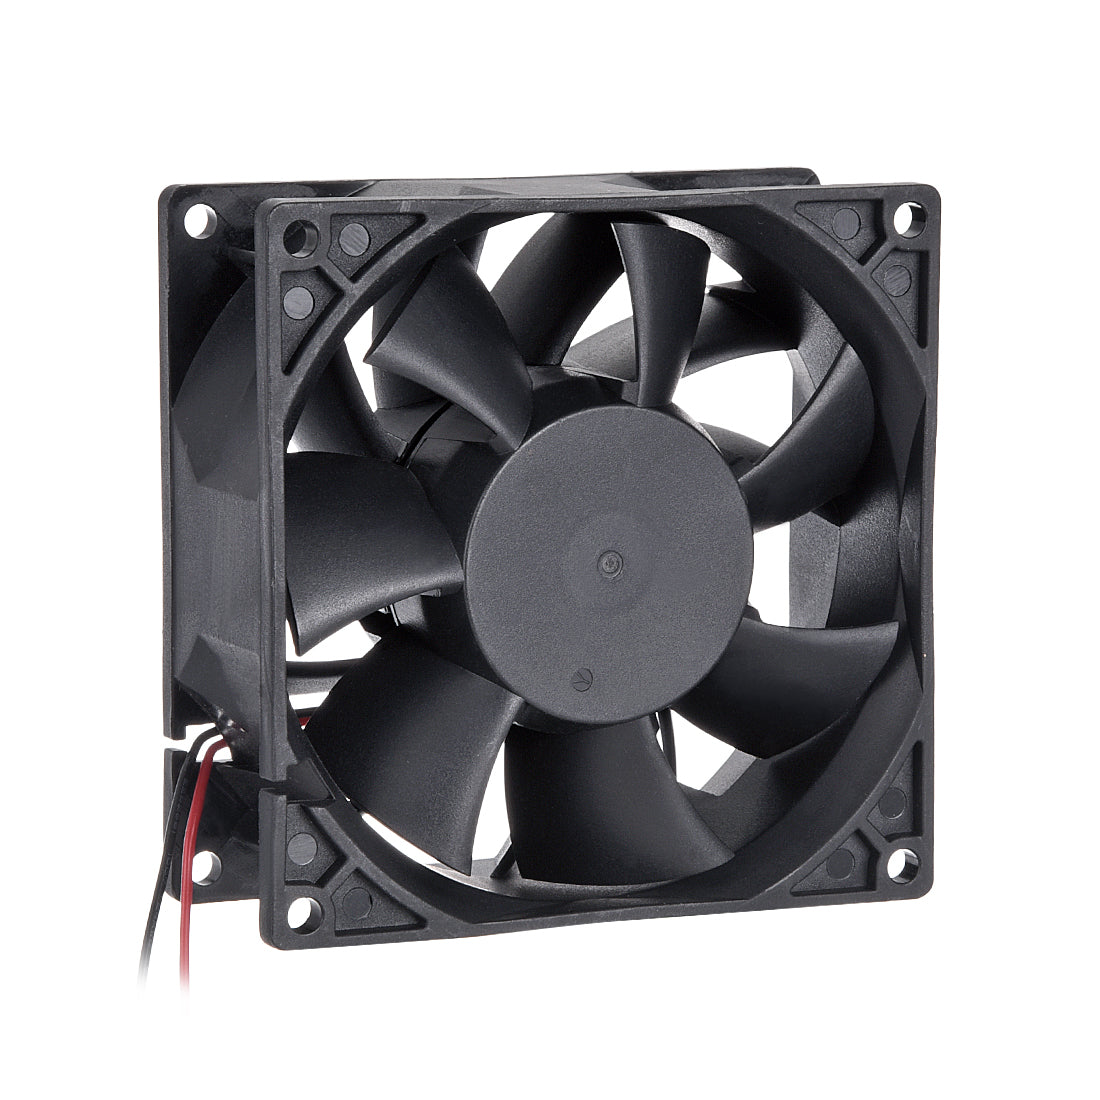 uxcell Uxcell SNOWFAN Authorized 92mm x 92mm x 38mm 48V Brushless DC Cooling Fan #0336